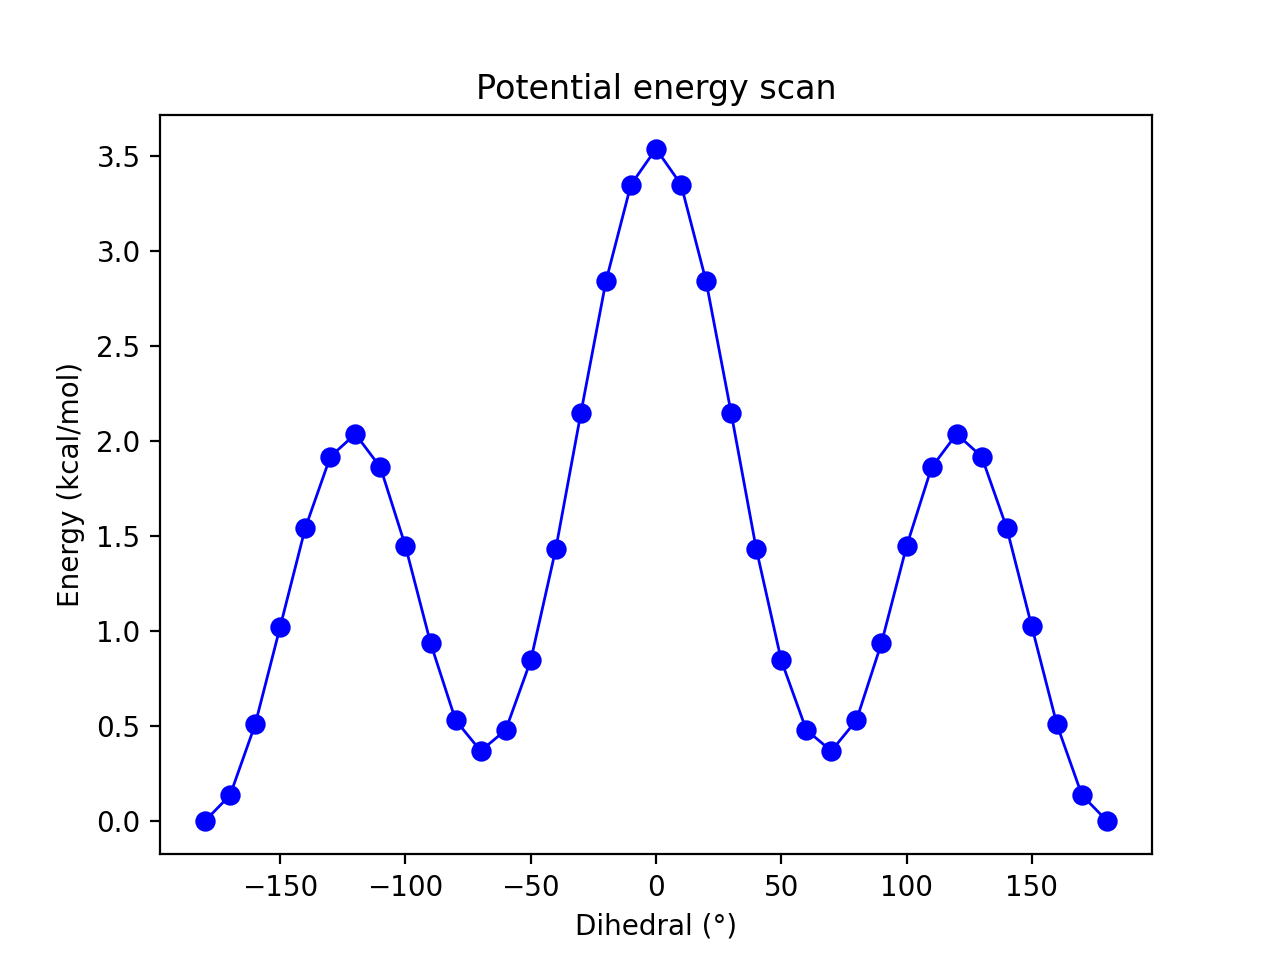 _images/butane_potenergy_scan.png